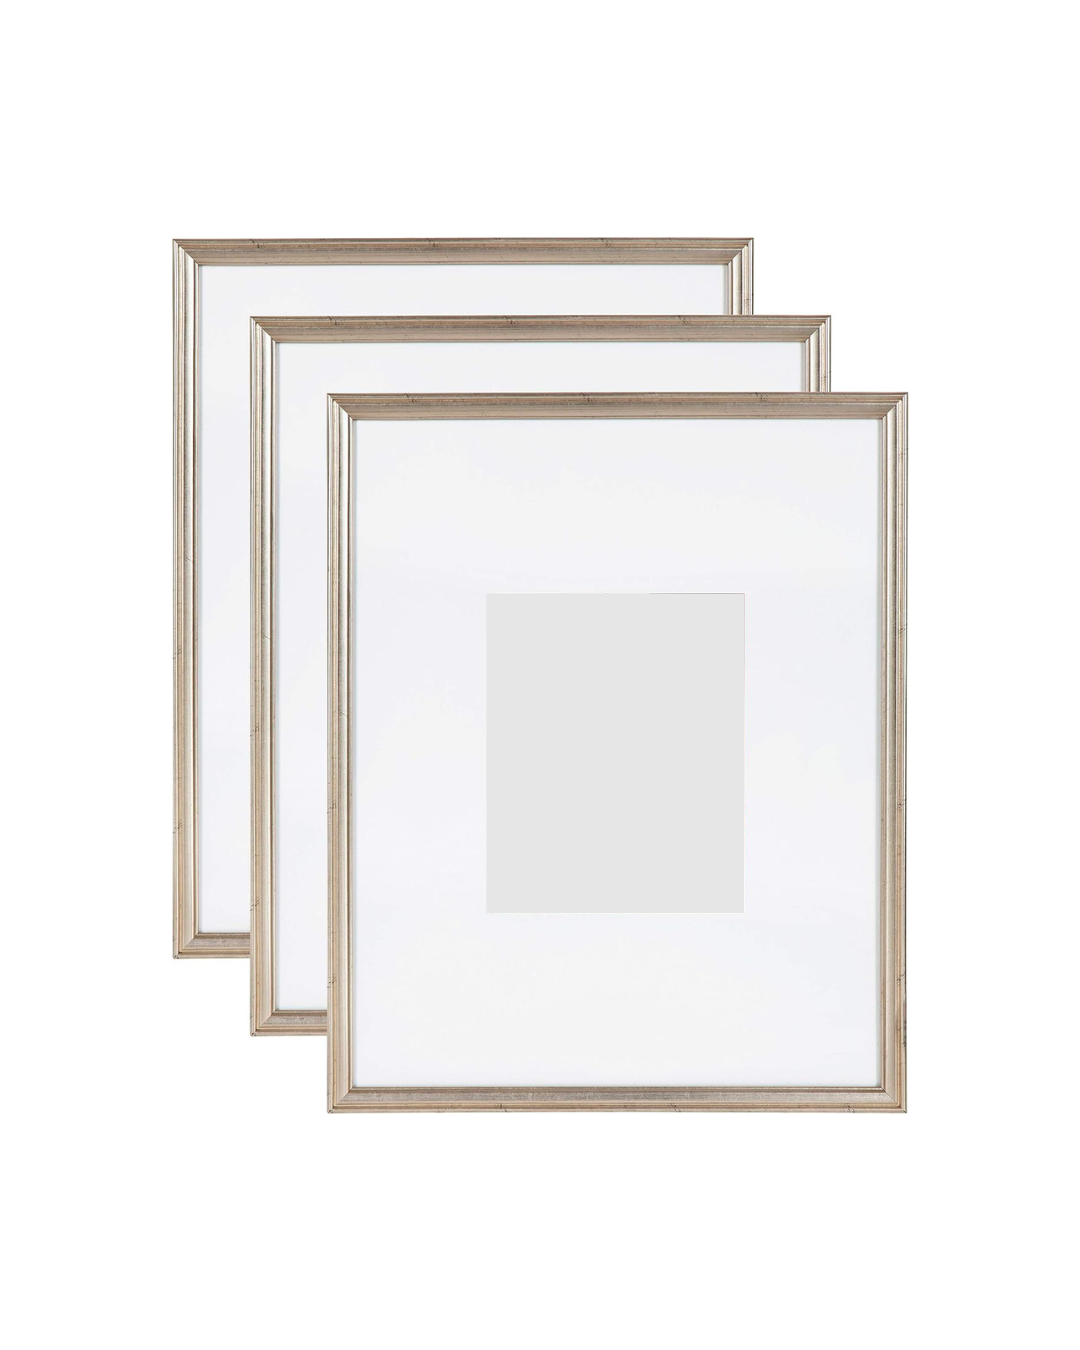 silver picture frames, matted frame, amazon home decor